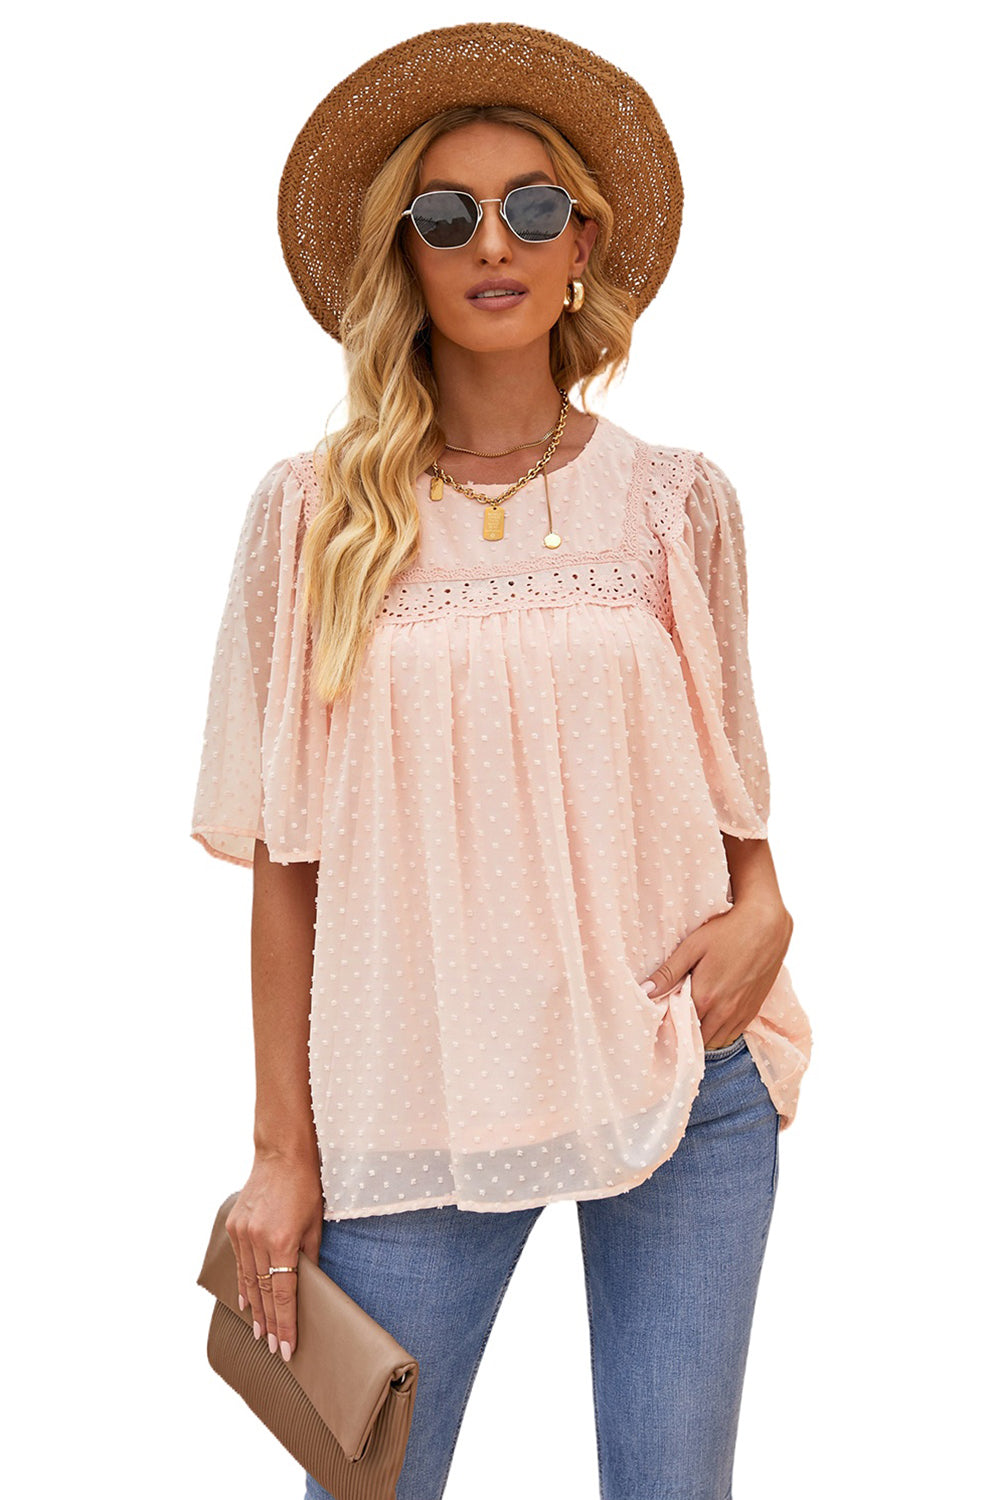 Chic Apricot Flutter Sleeves Sheer Textured Babydoll Top